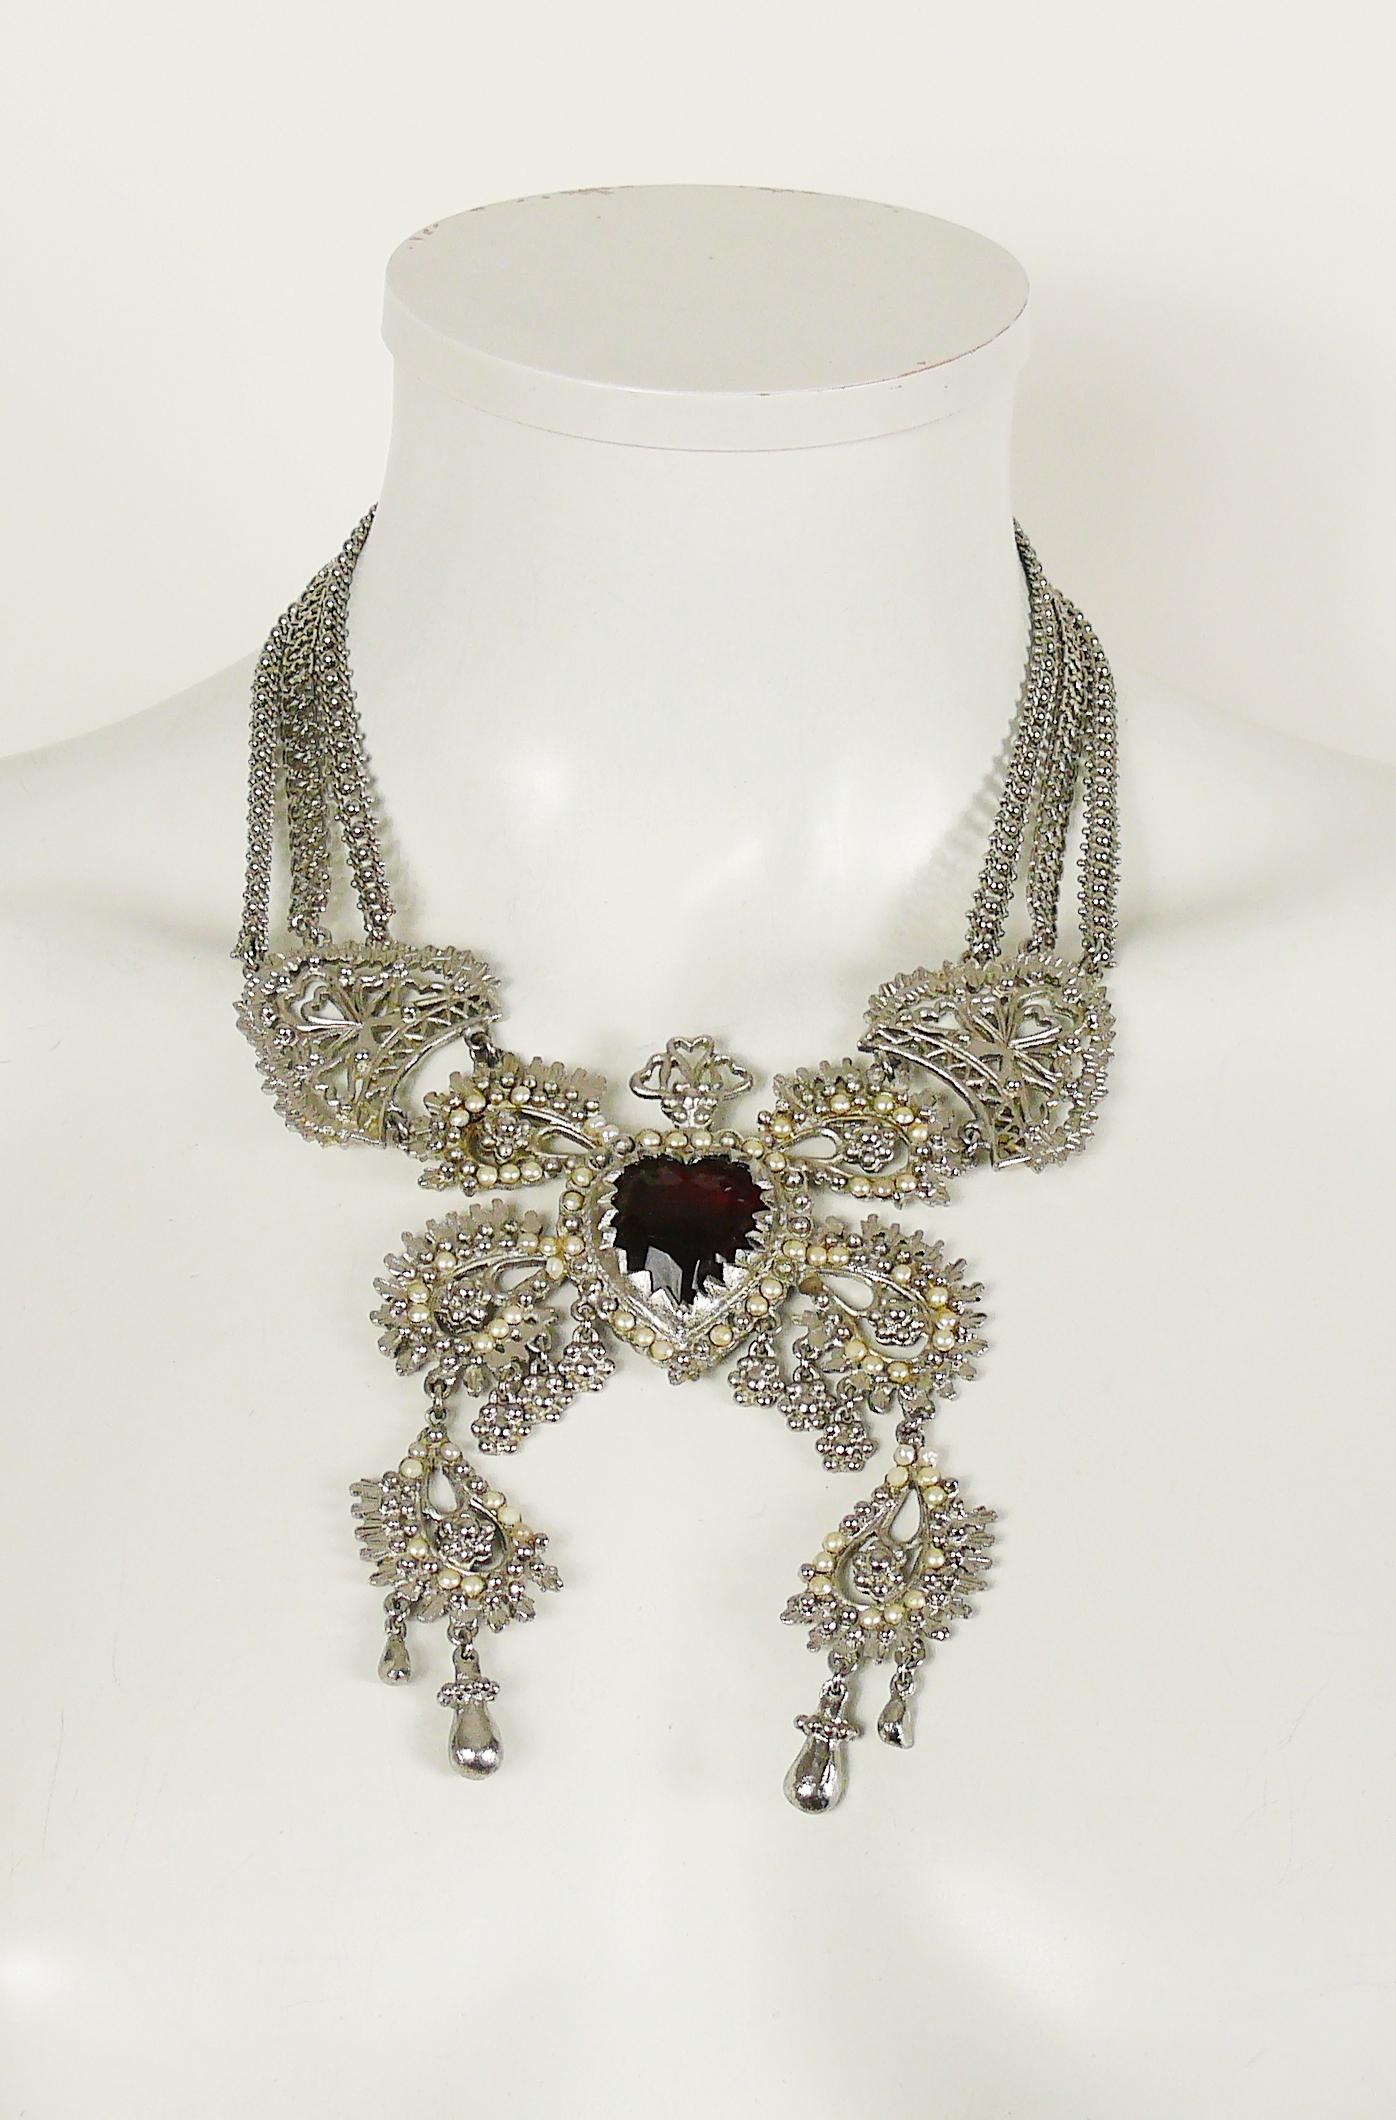 CHRISTIAN LACROIX vintage rare and opulent multi chain silver toned necklace featuring an ex voto sacred heart, adorned with boteh-like design details, embellished with a large faceted ruby glass cabochon and off-white pearls.

Hook clasp